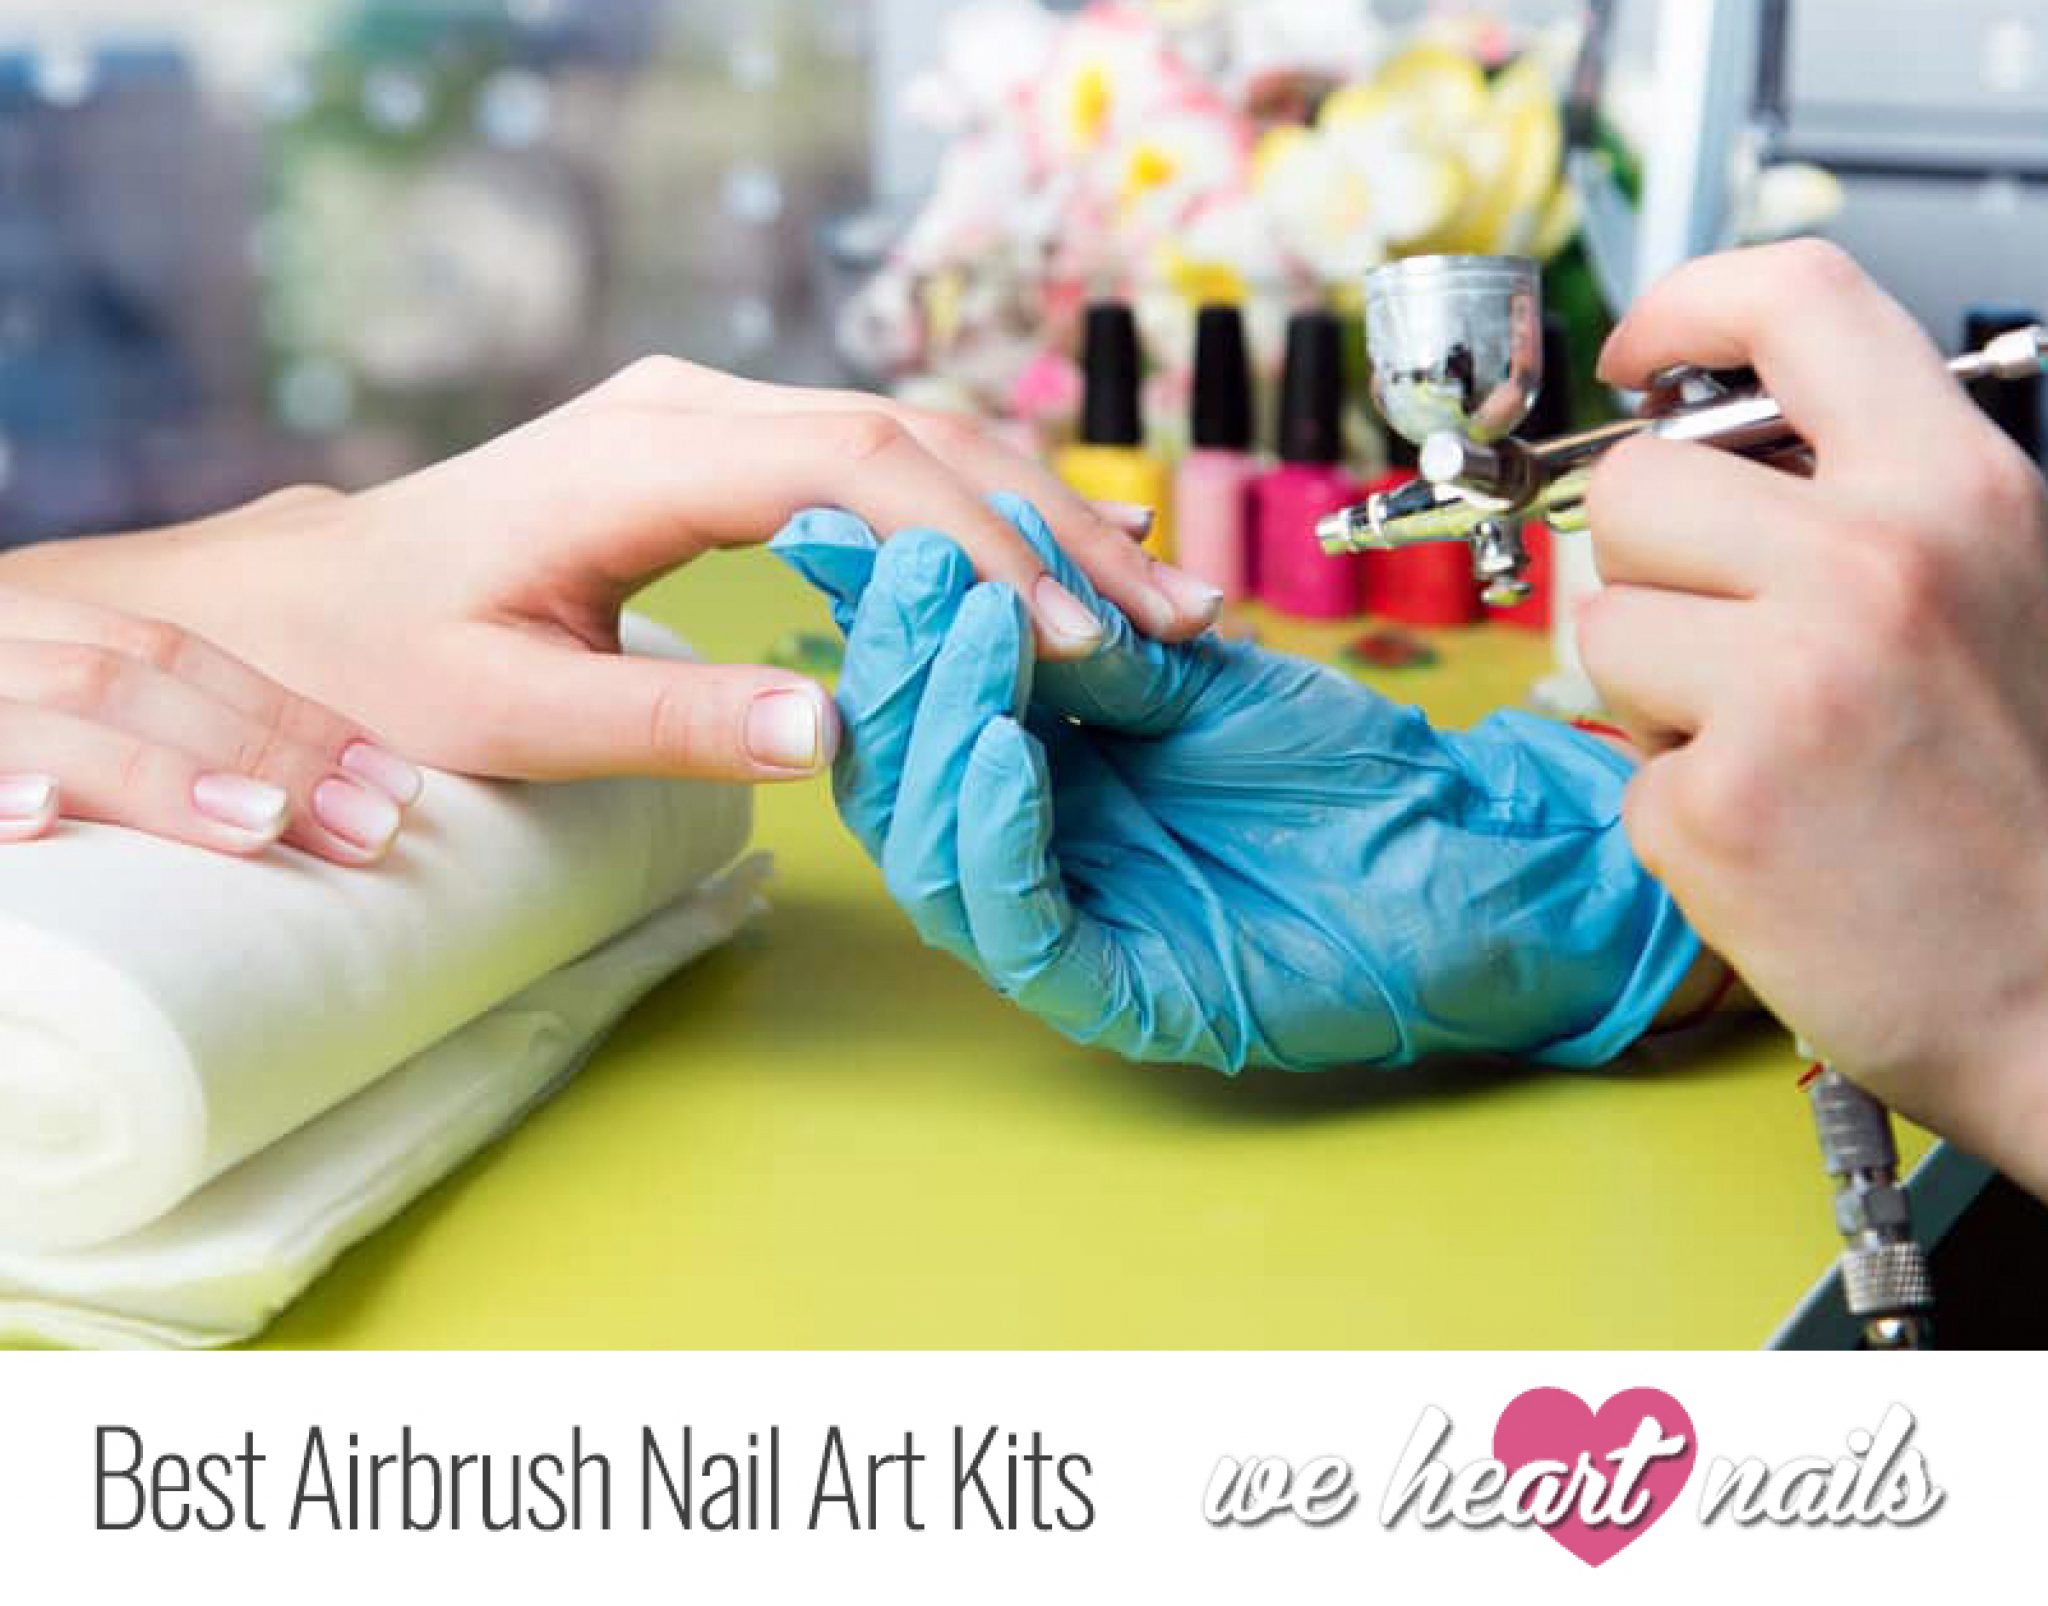 3. Vintage Airbrush Nail Art from the 1990s - wide 6